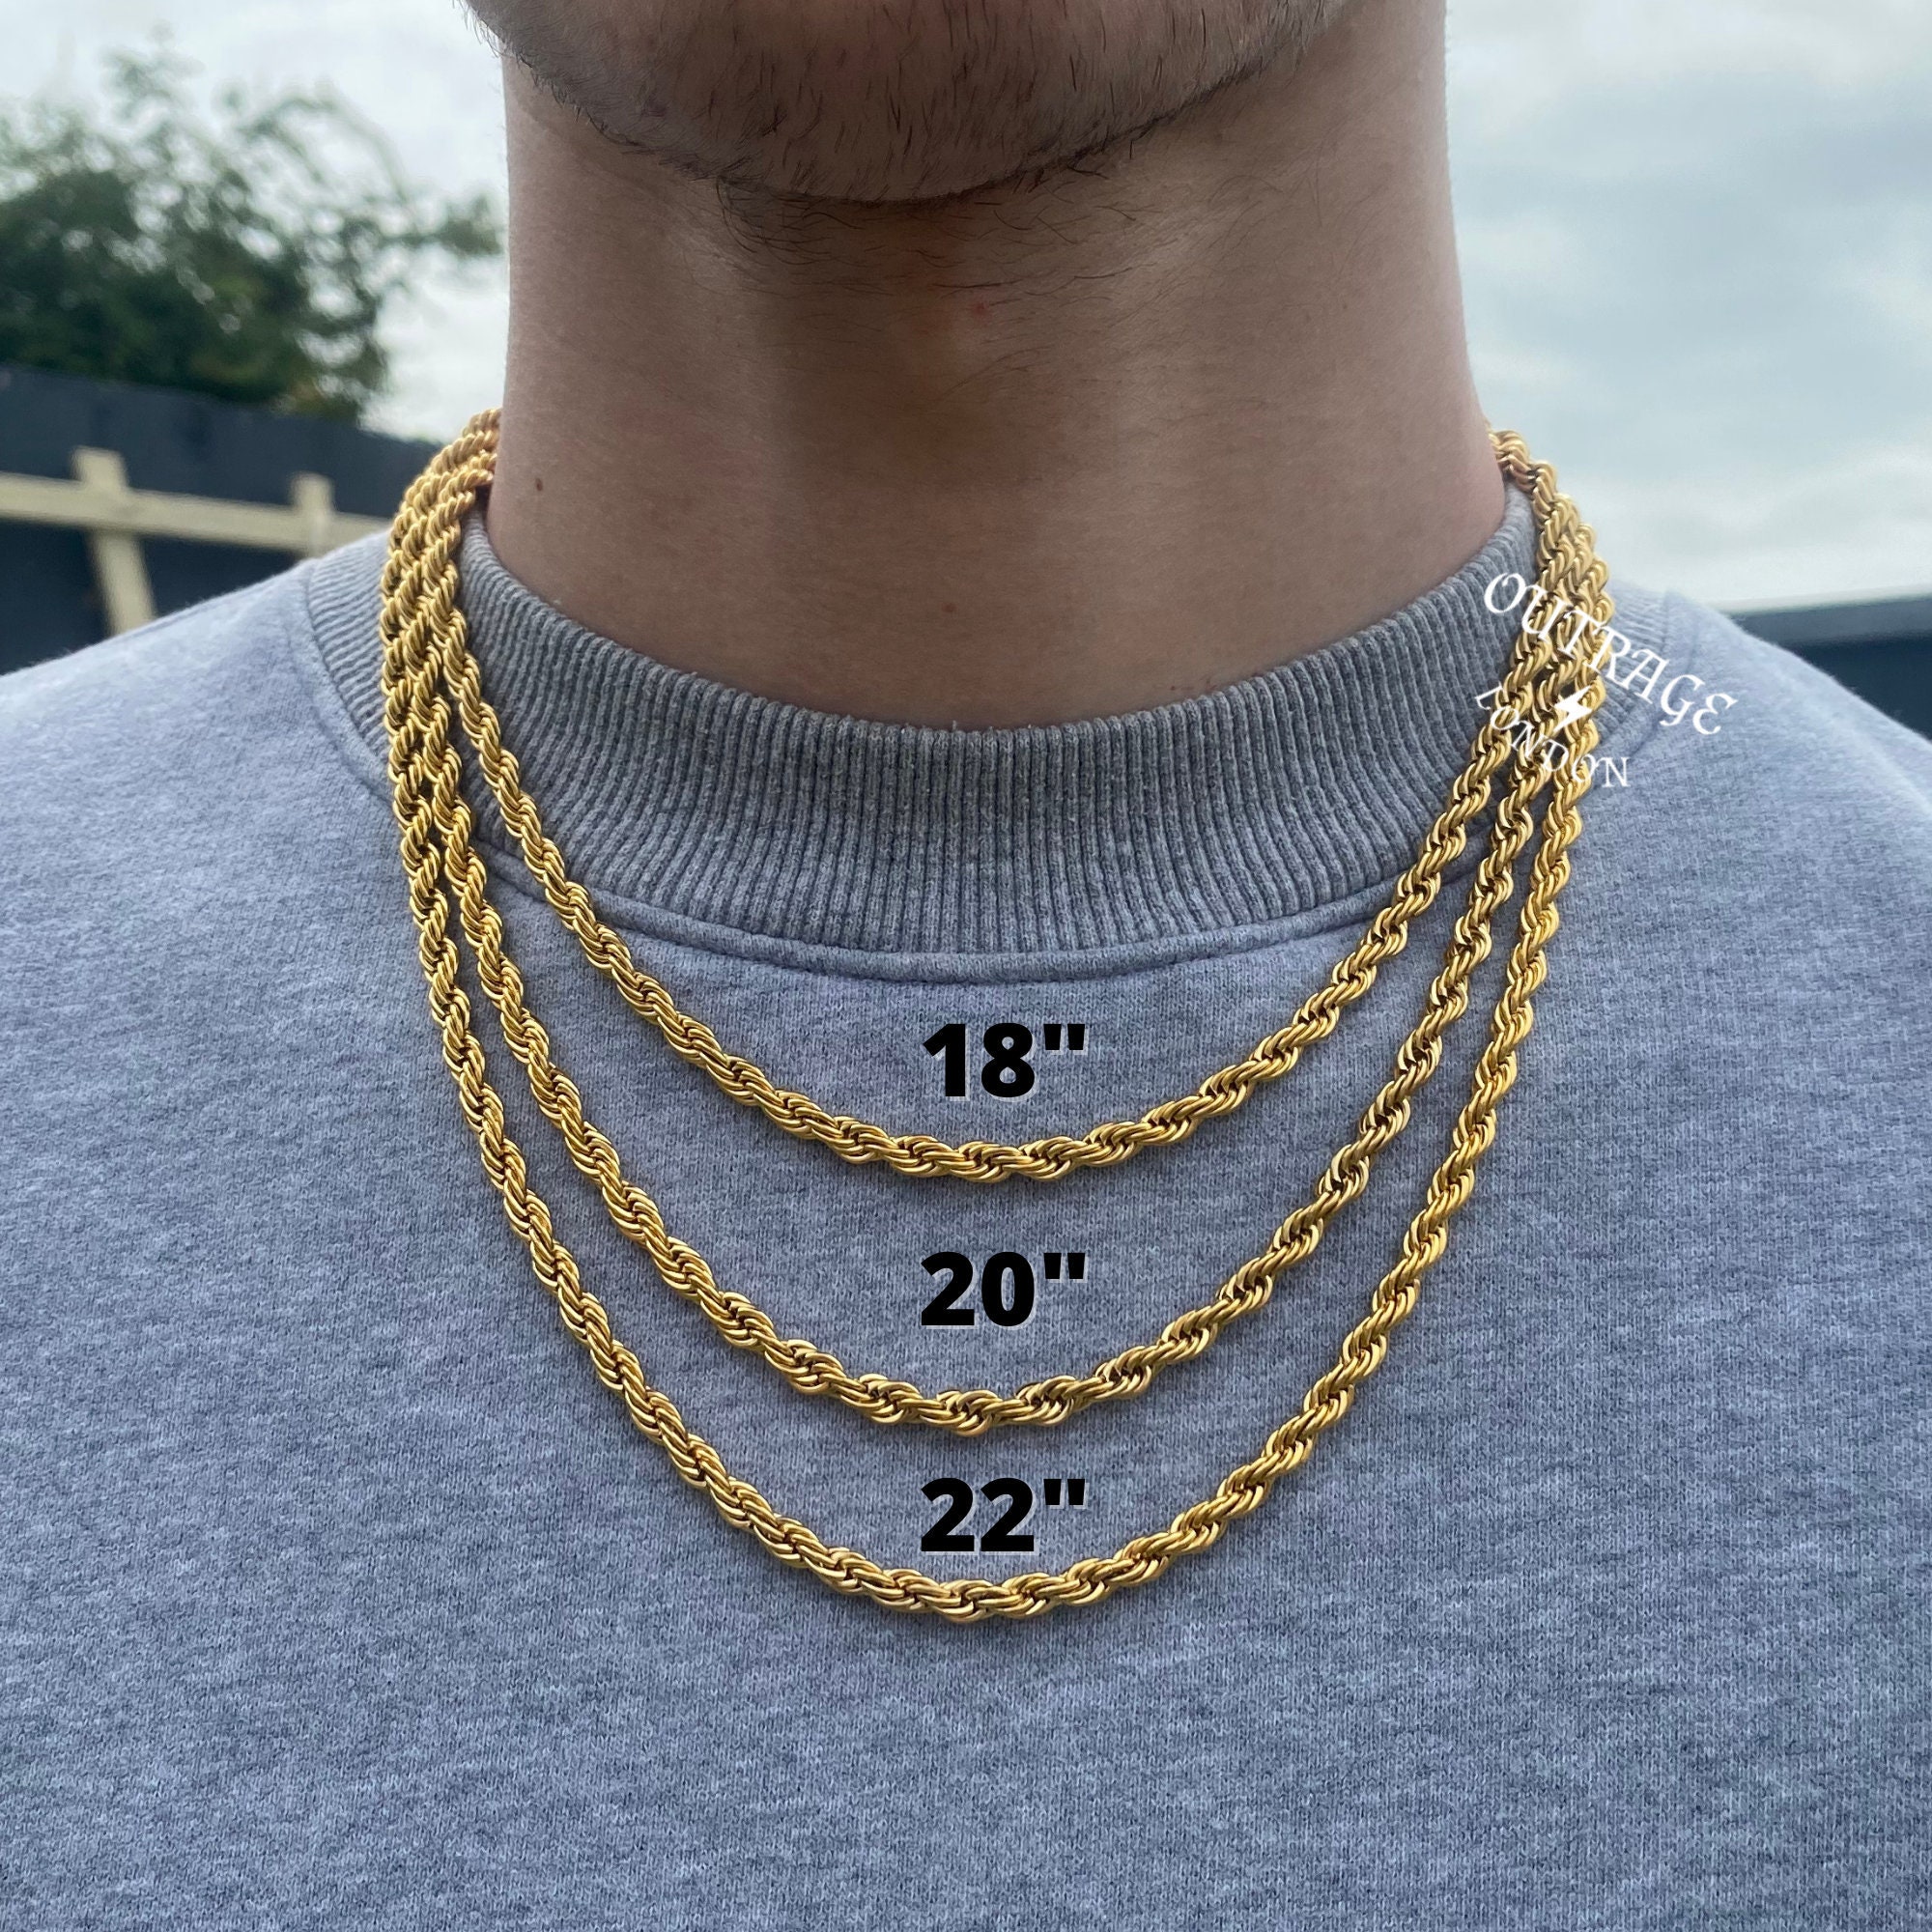 Mens Chain Gold Rope Chain Necklace Gold Chains for Men 